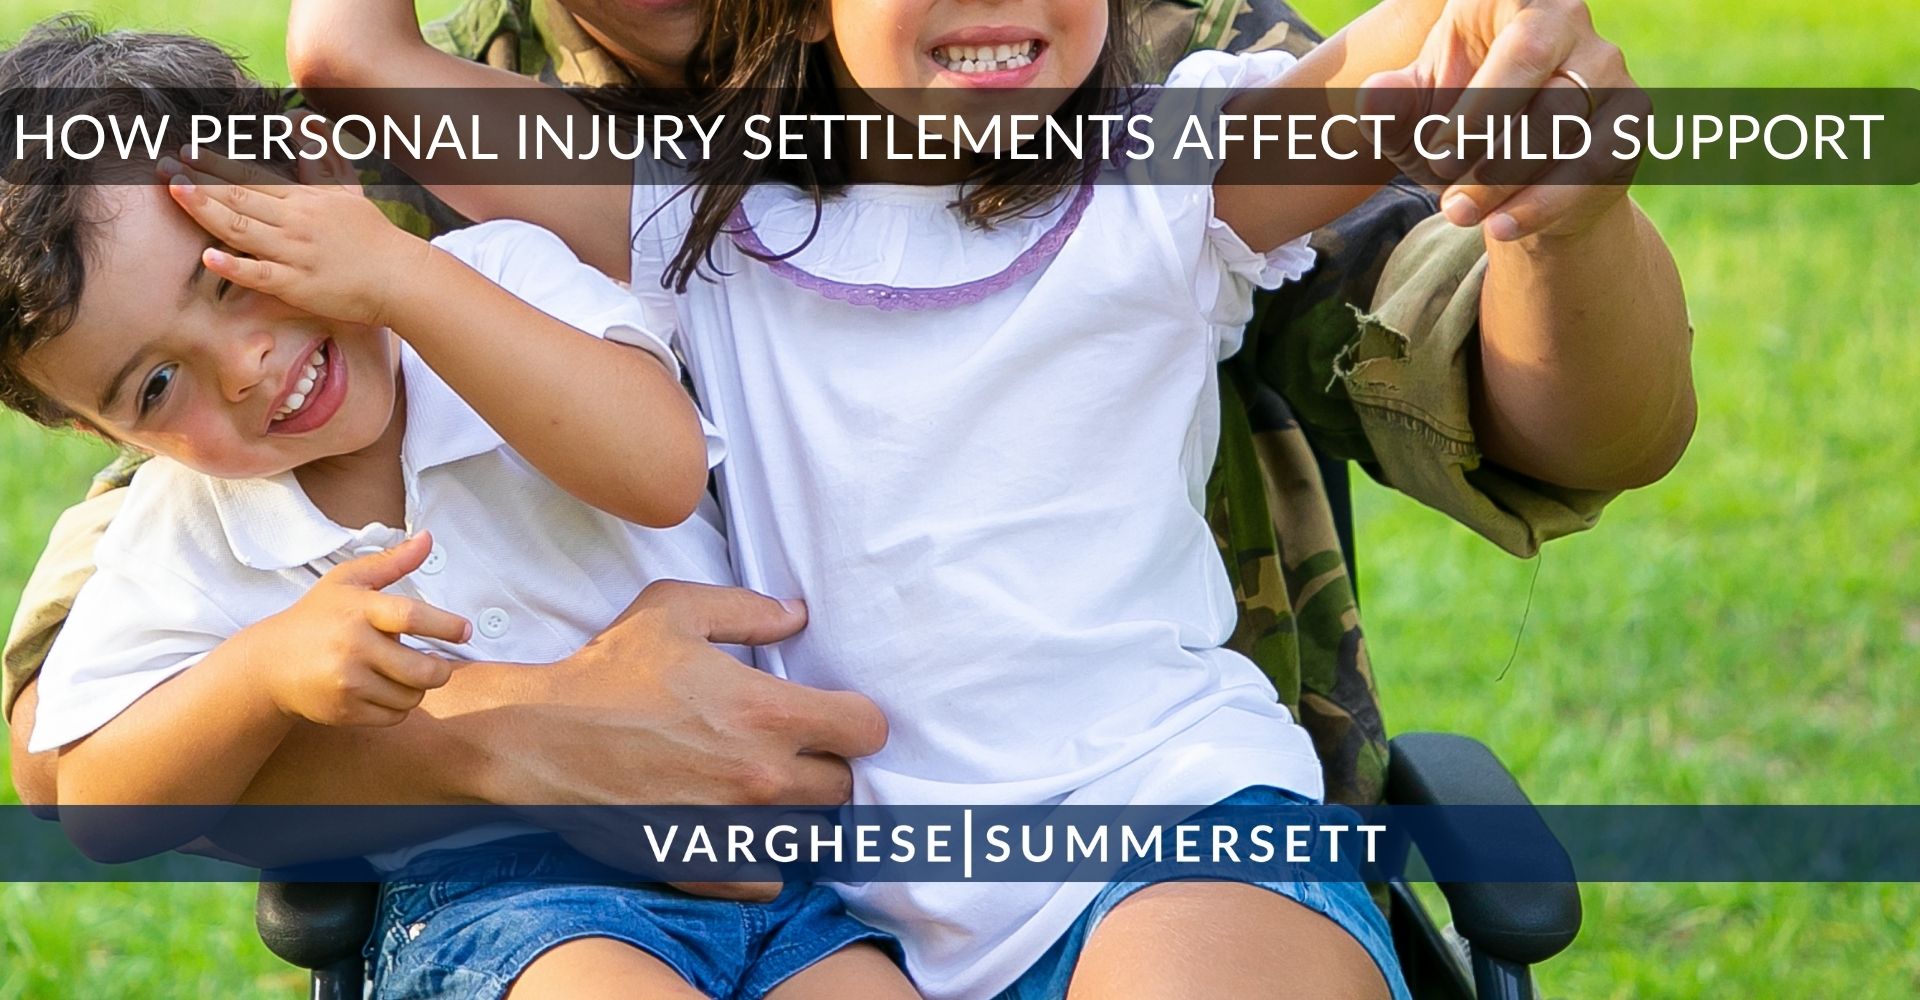 How Personal Injury Settlements Affect Child Support